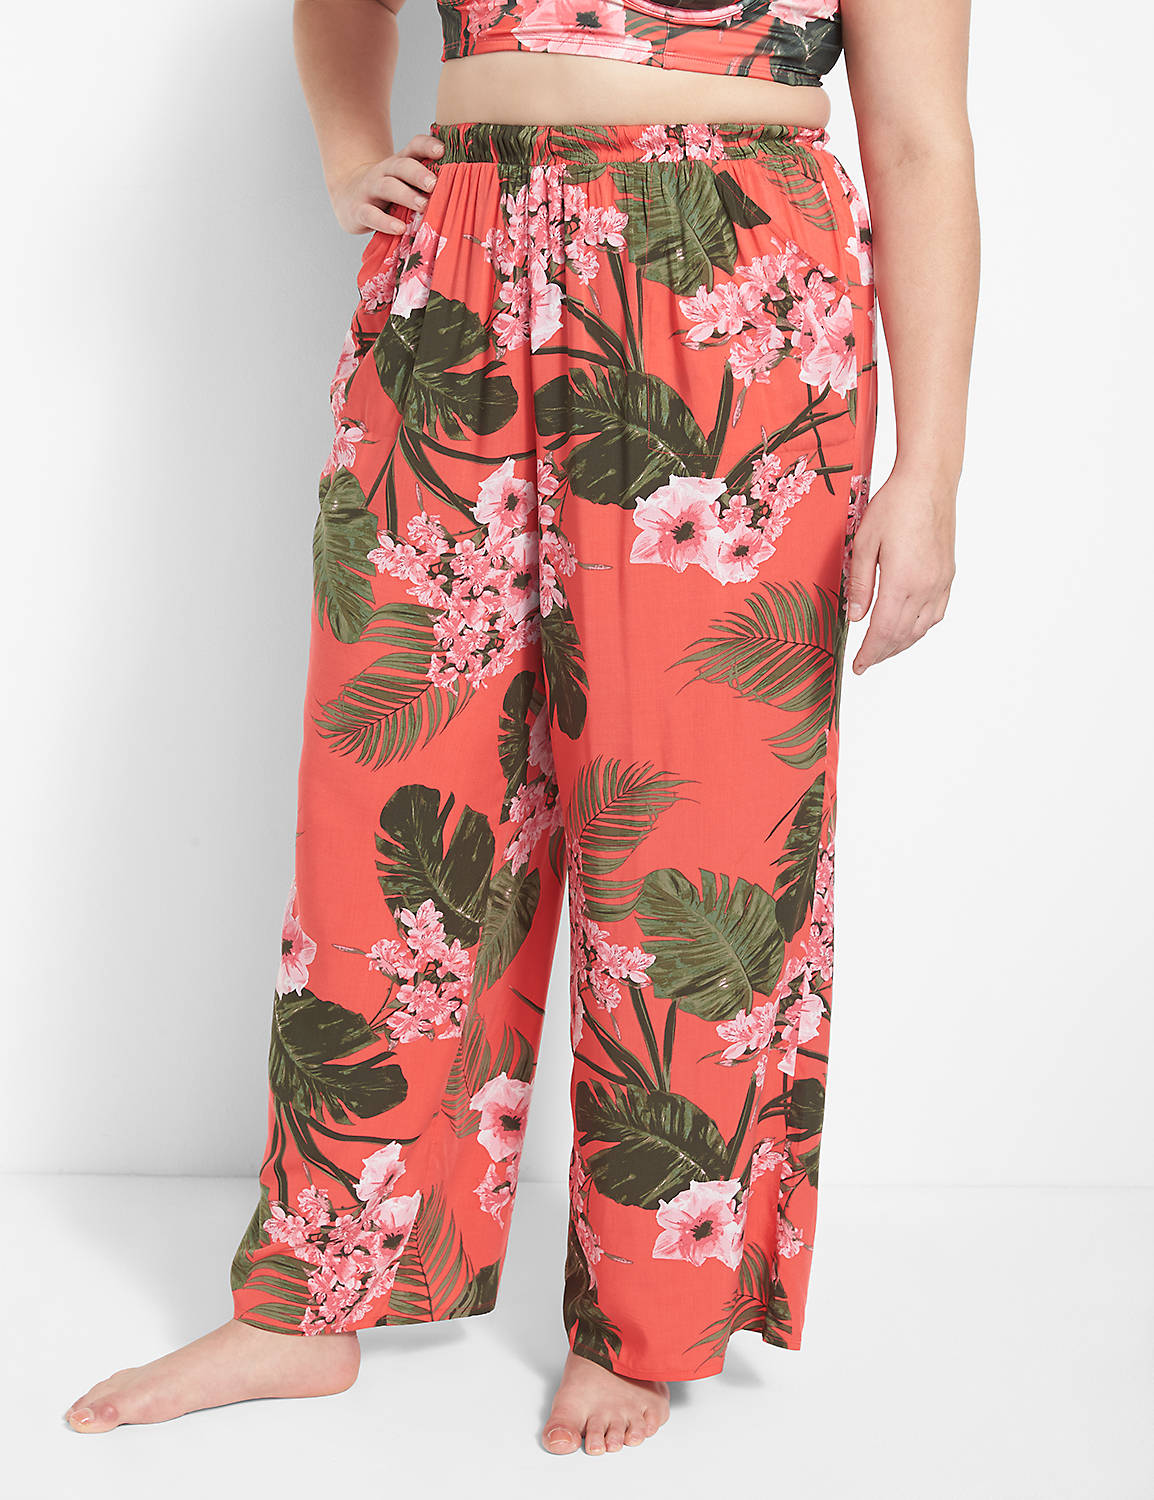 Wide Leg Tie Pant Cover Up 1117730 Product Image 1